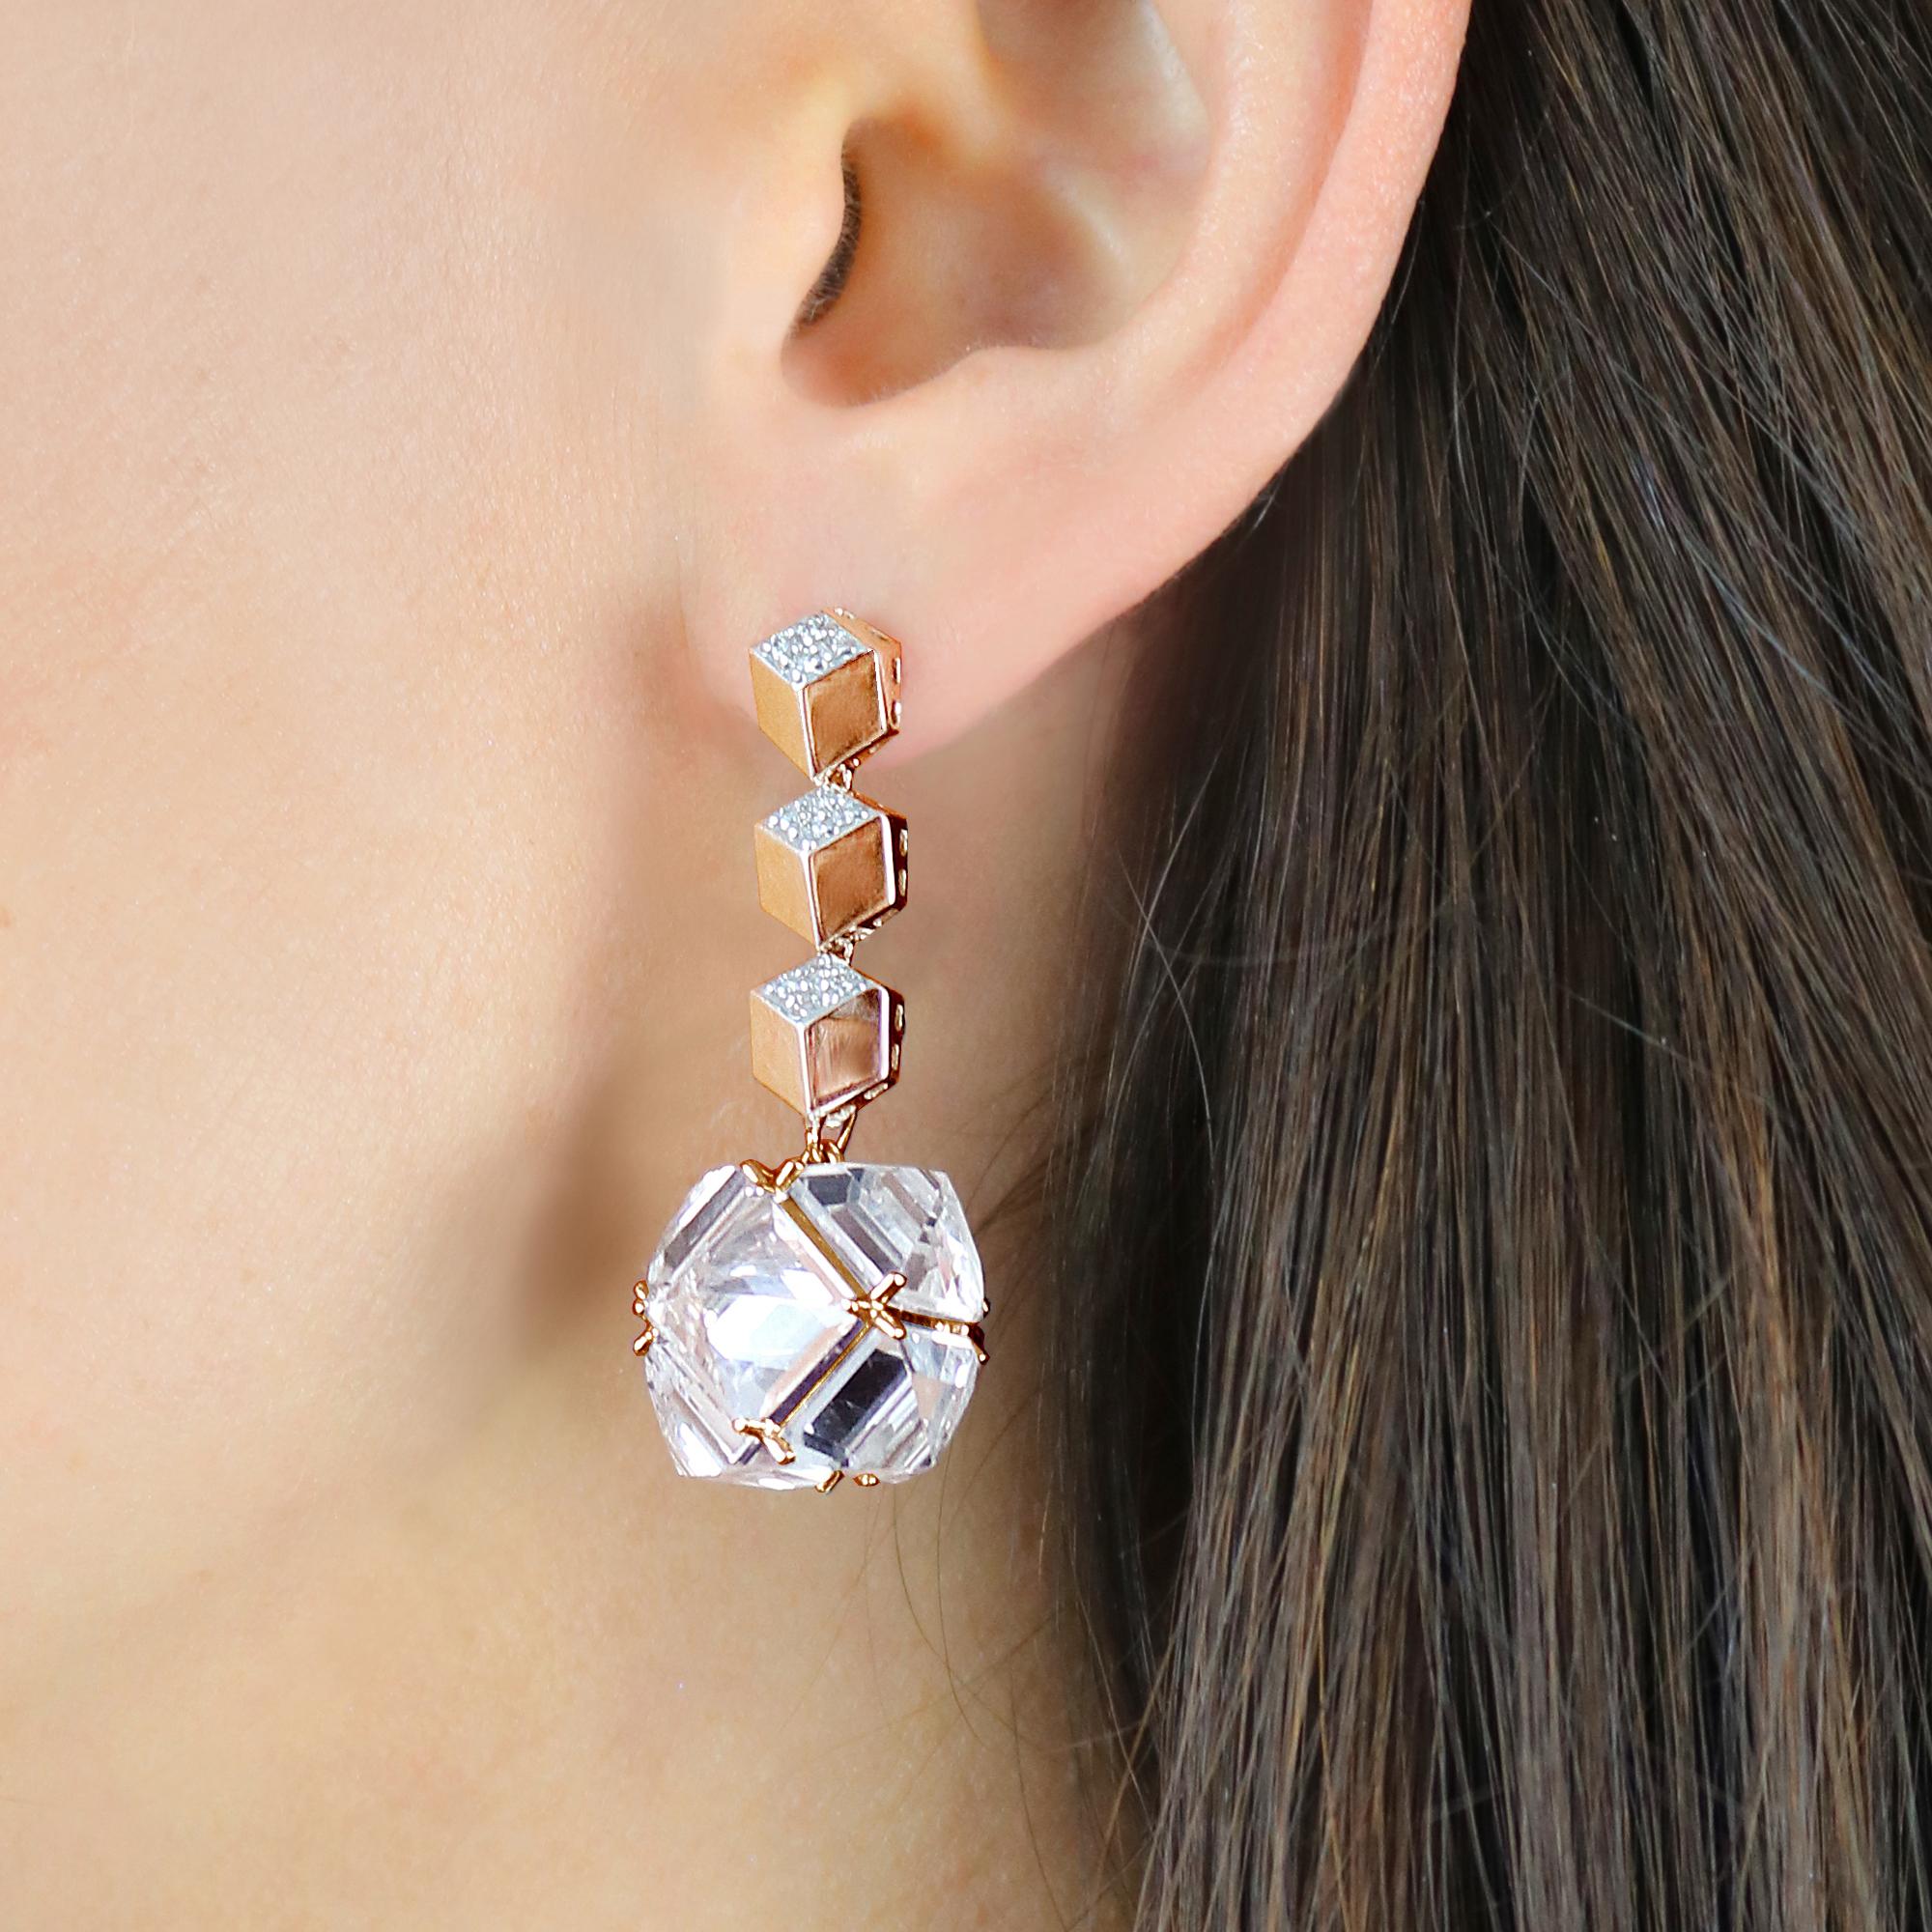 High polish 18 karat rose gold Brillante® earrings with pave-set diamonds paired with reverse-set emerald-cut white topaz earring pendants from the Very PC®collection. 

Staying true to Paolo Costagli's appreciation for modern and clean geometries,